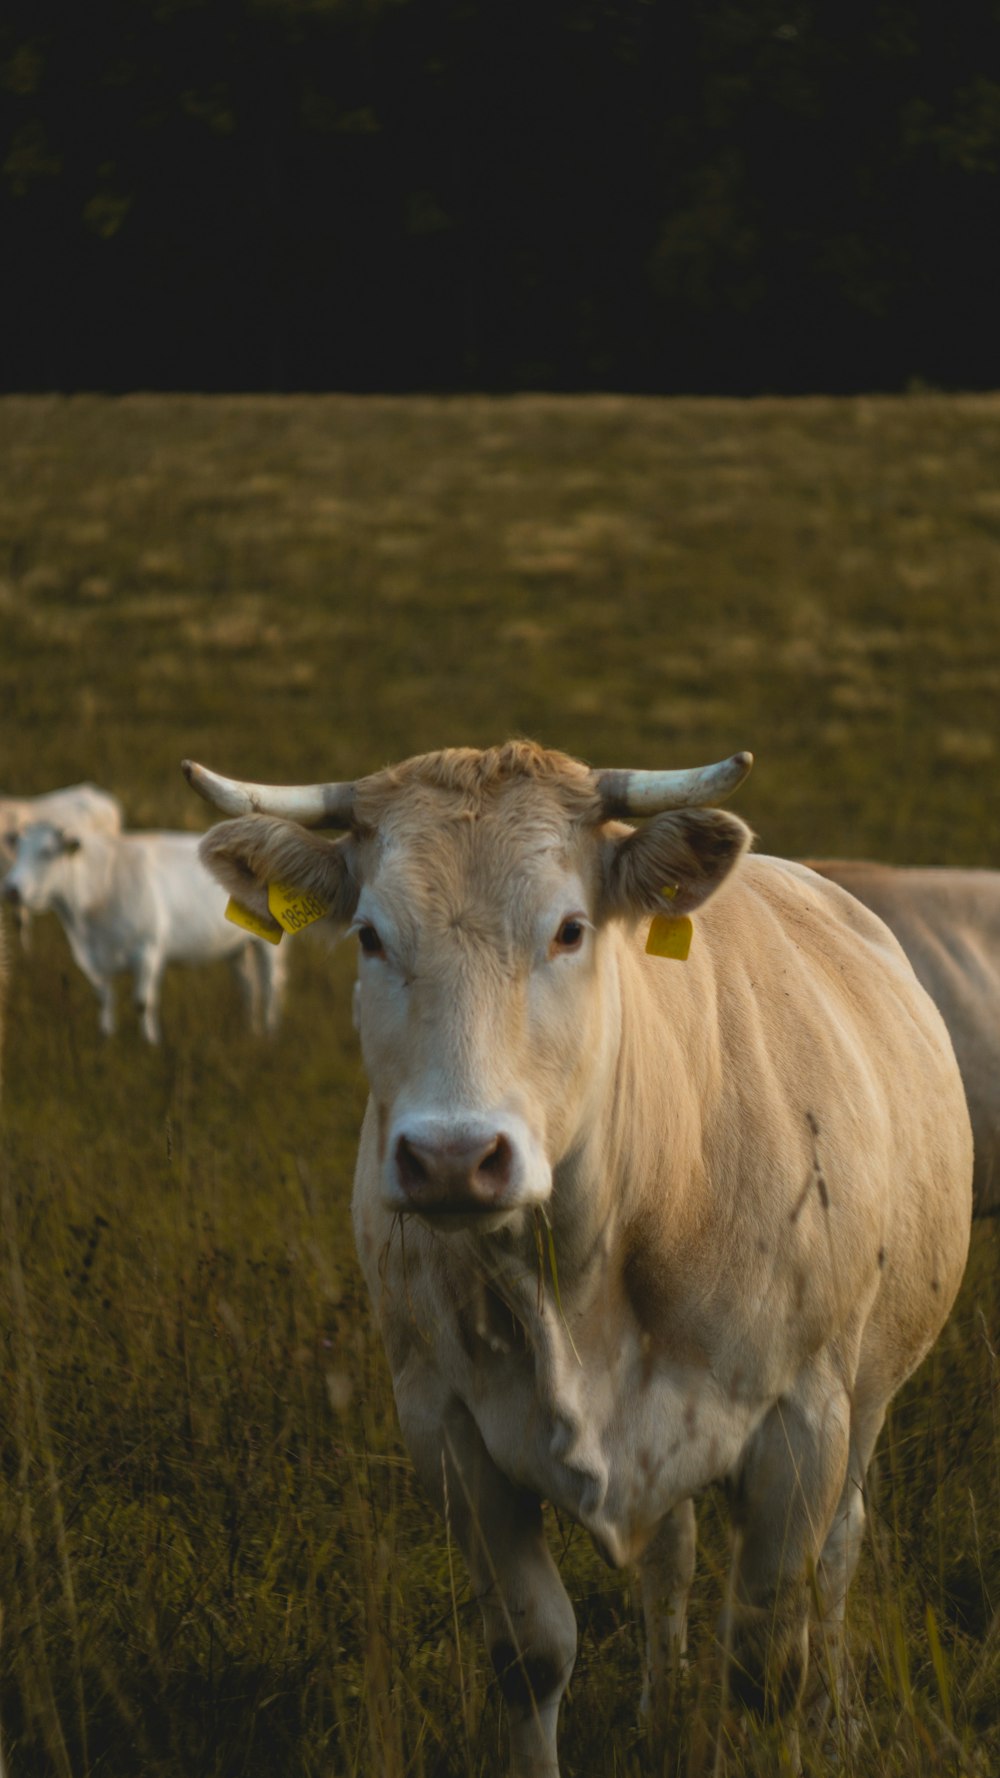 white and brown cow standing on grass